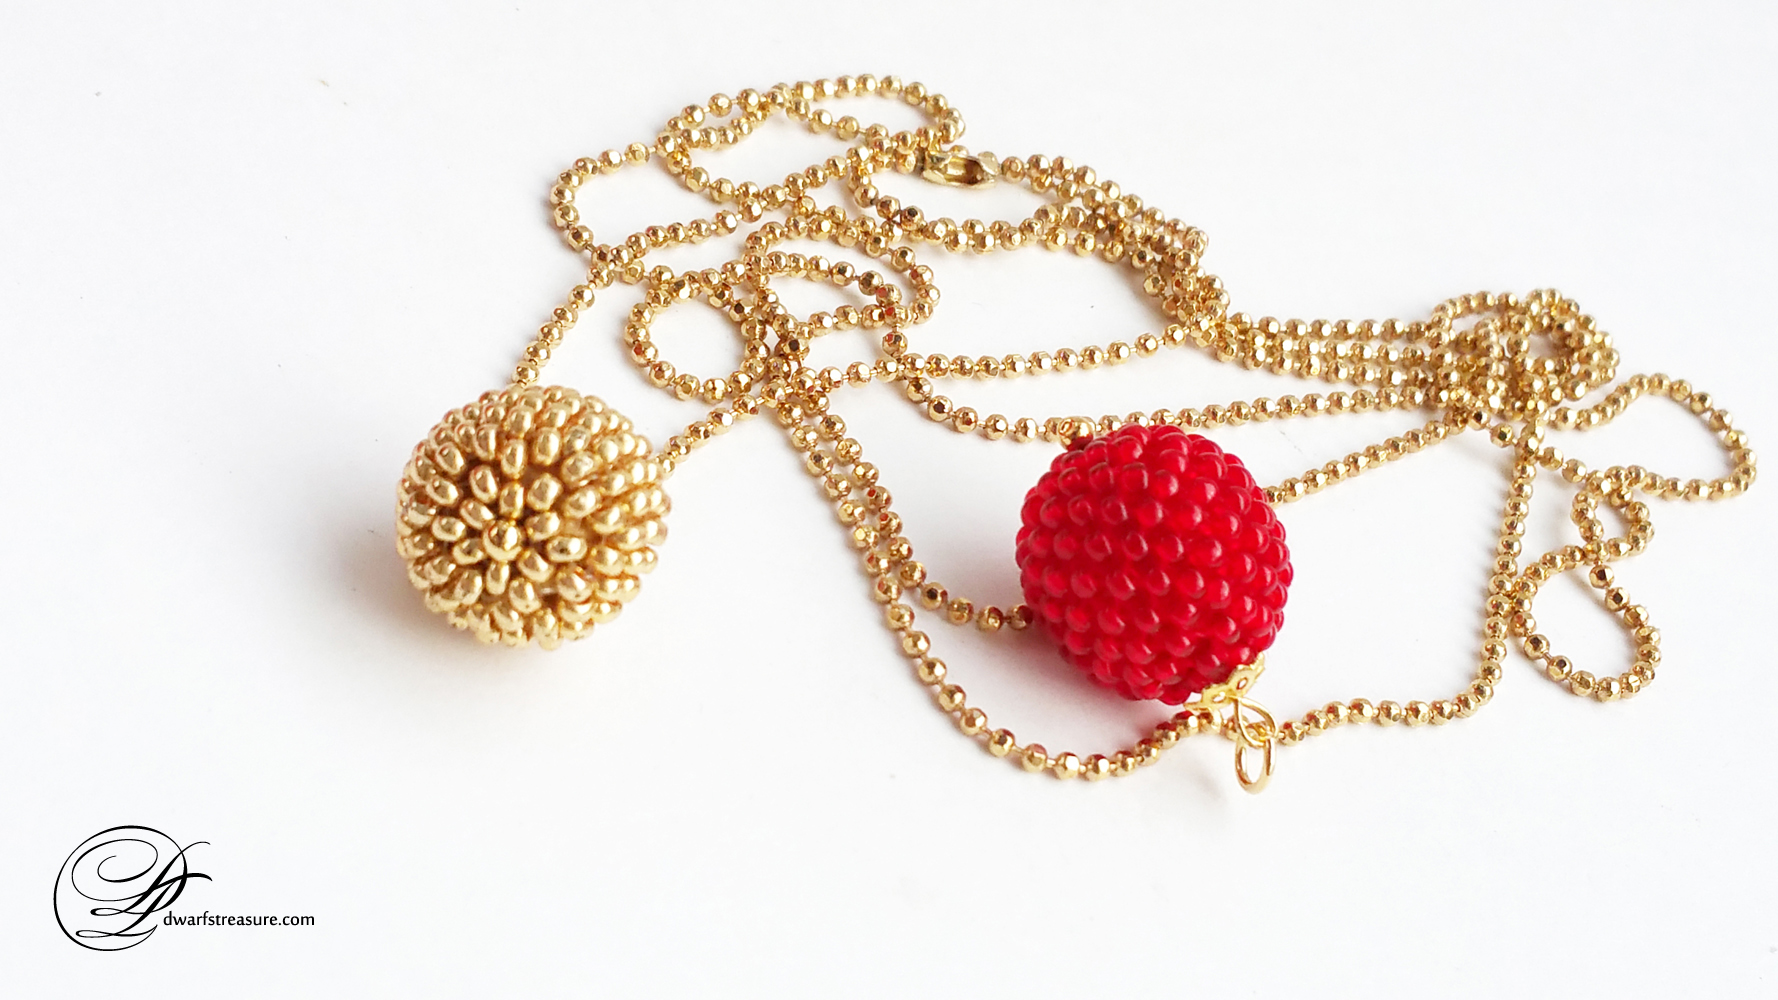 Sophisticated gold and red beaded ball charms